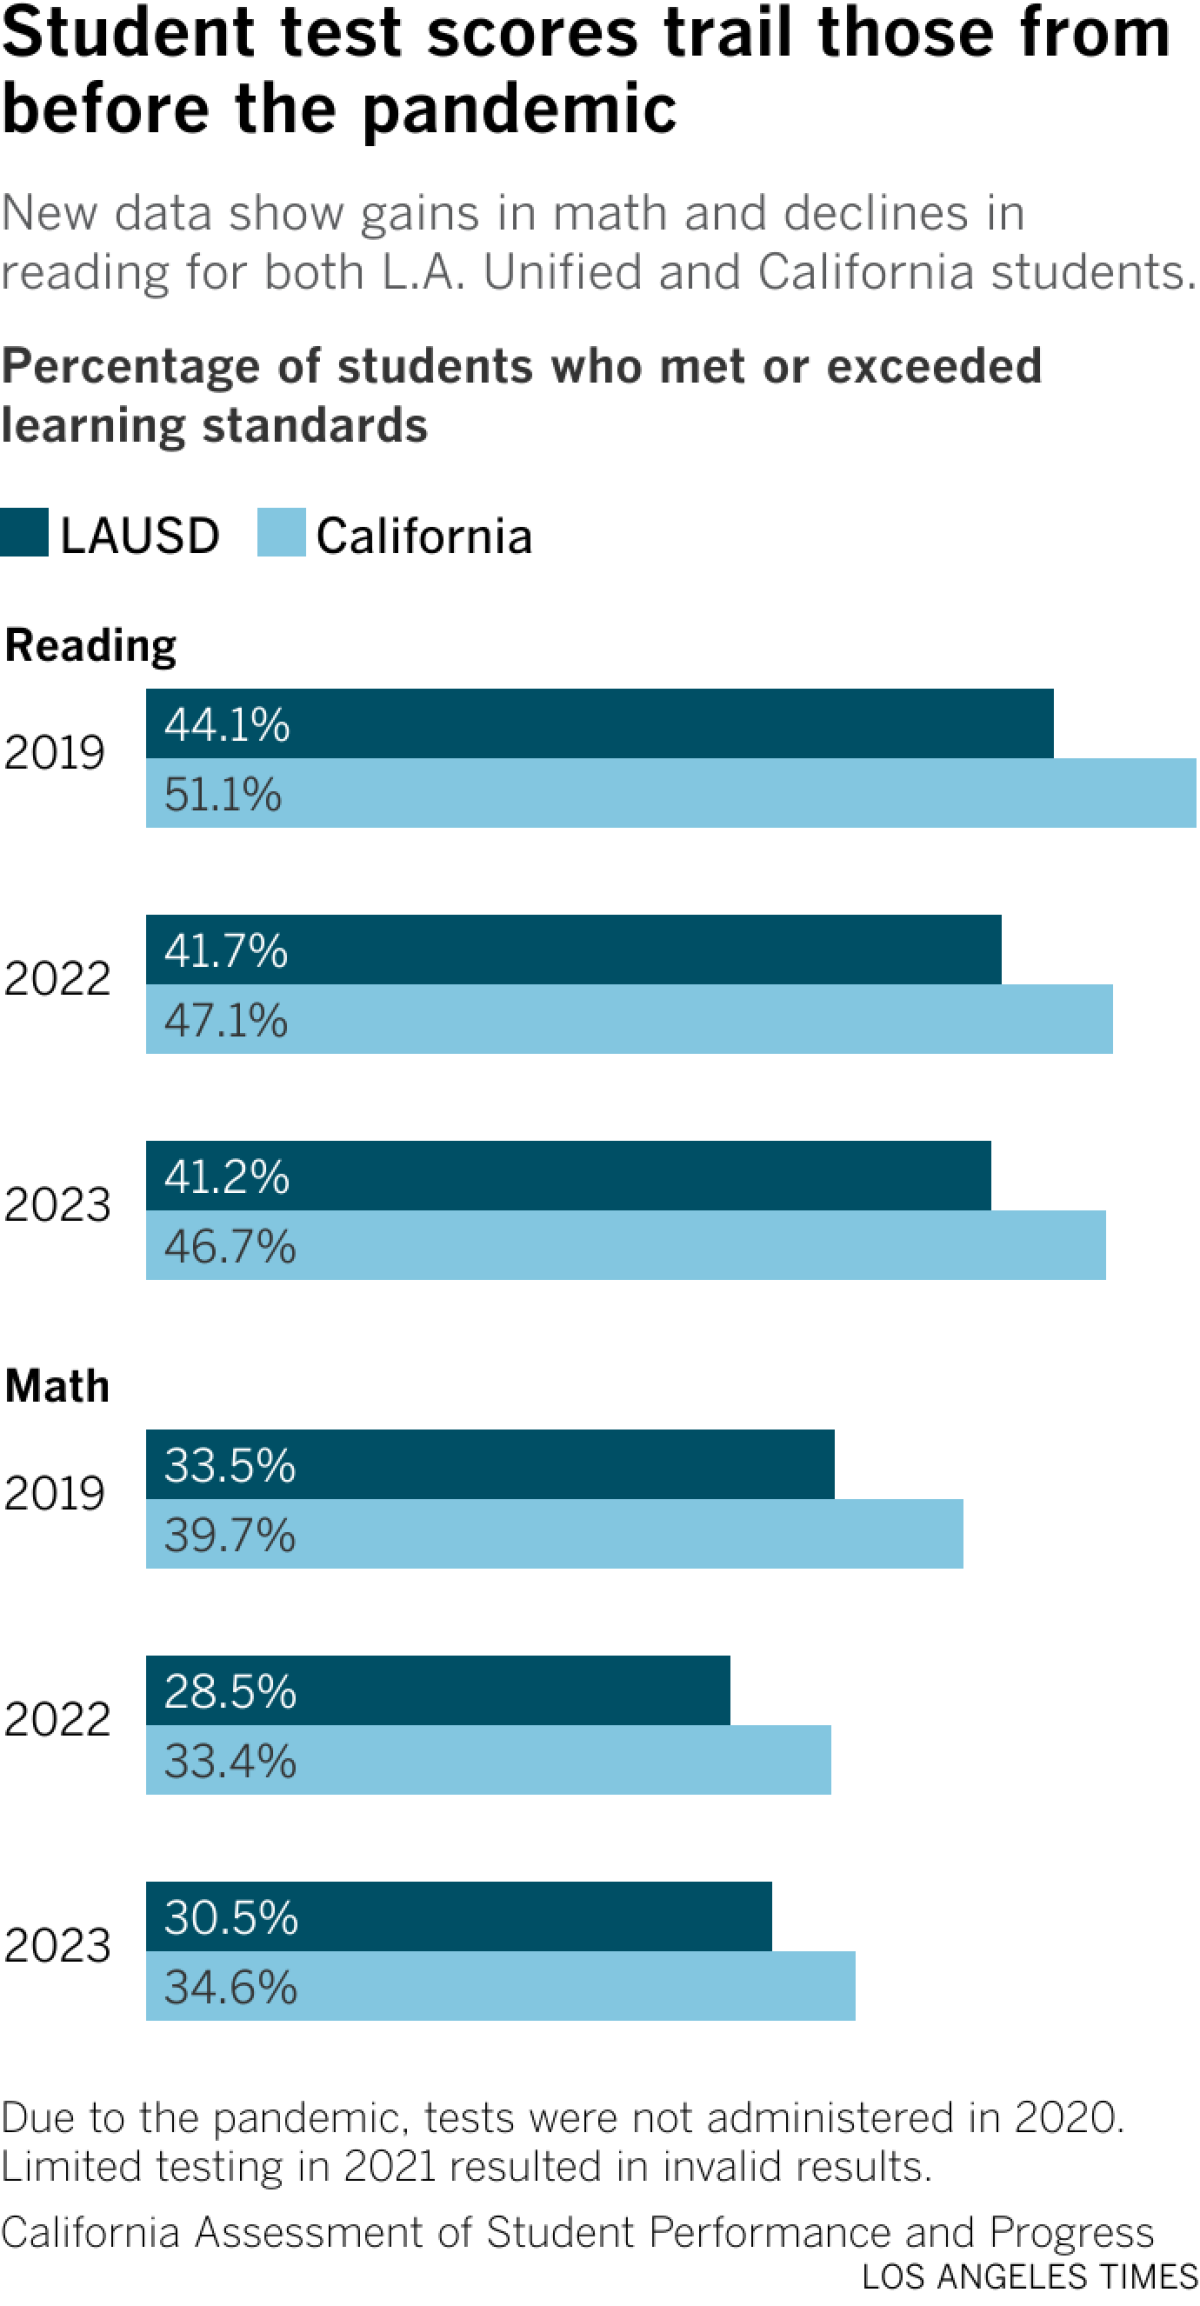 Stacked bar chart showing Math and reading scores for California and LAUSD students in 2019, 2022 and 2023.